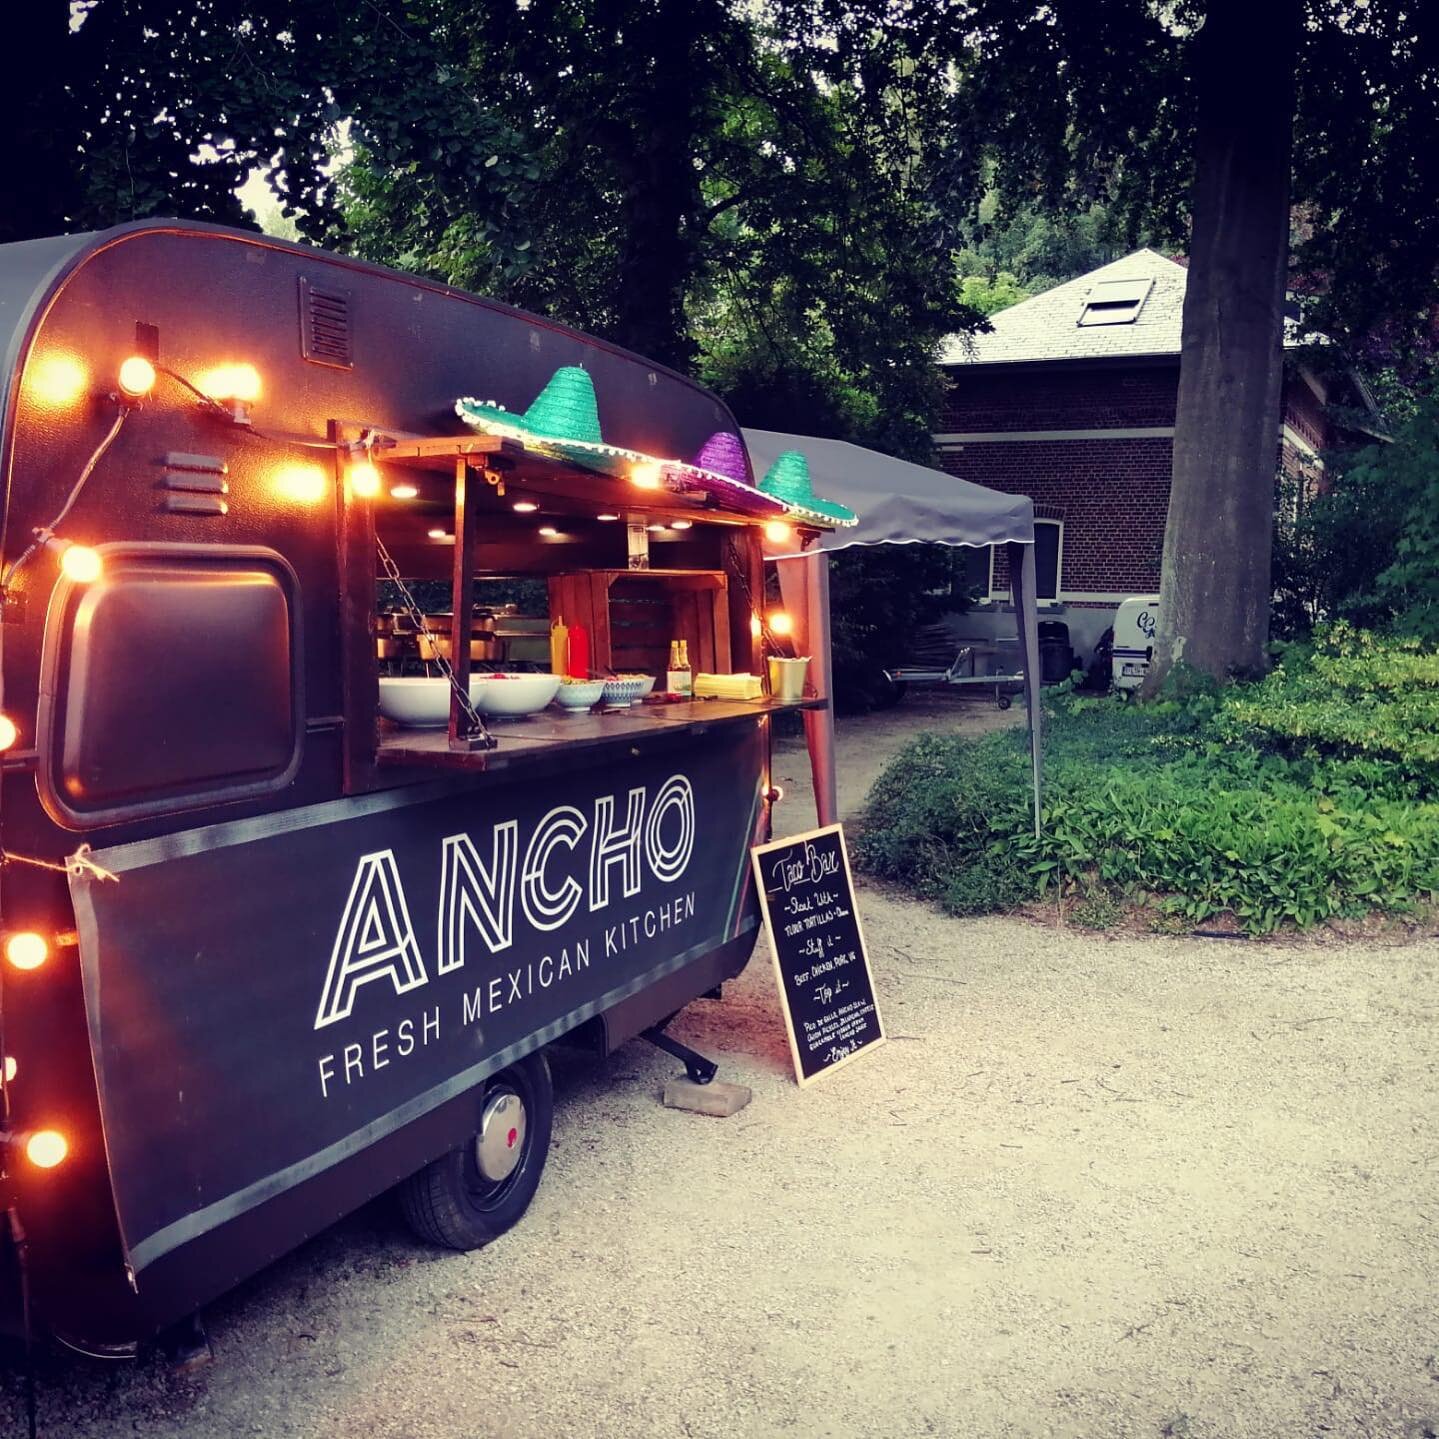 No need to travel the world for great food ! 🌎
Meet us this week-end at the Brussels Food Festival. Friday 11, Saturday 12 and Sunday 13 🌮🌵🎉 &thinsp;
&thinsp;
#brusselsfoodfestival #brussels #ancho #anchobelgium #mexicanfood #travel #nacho #tacos